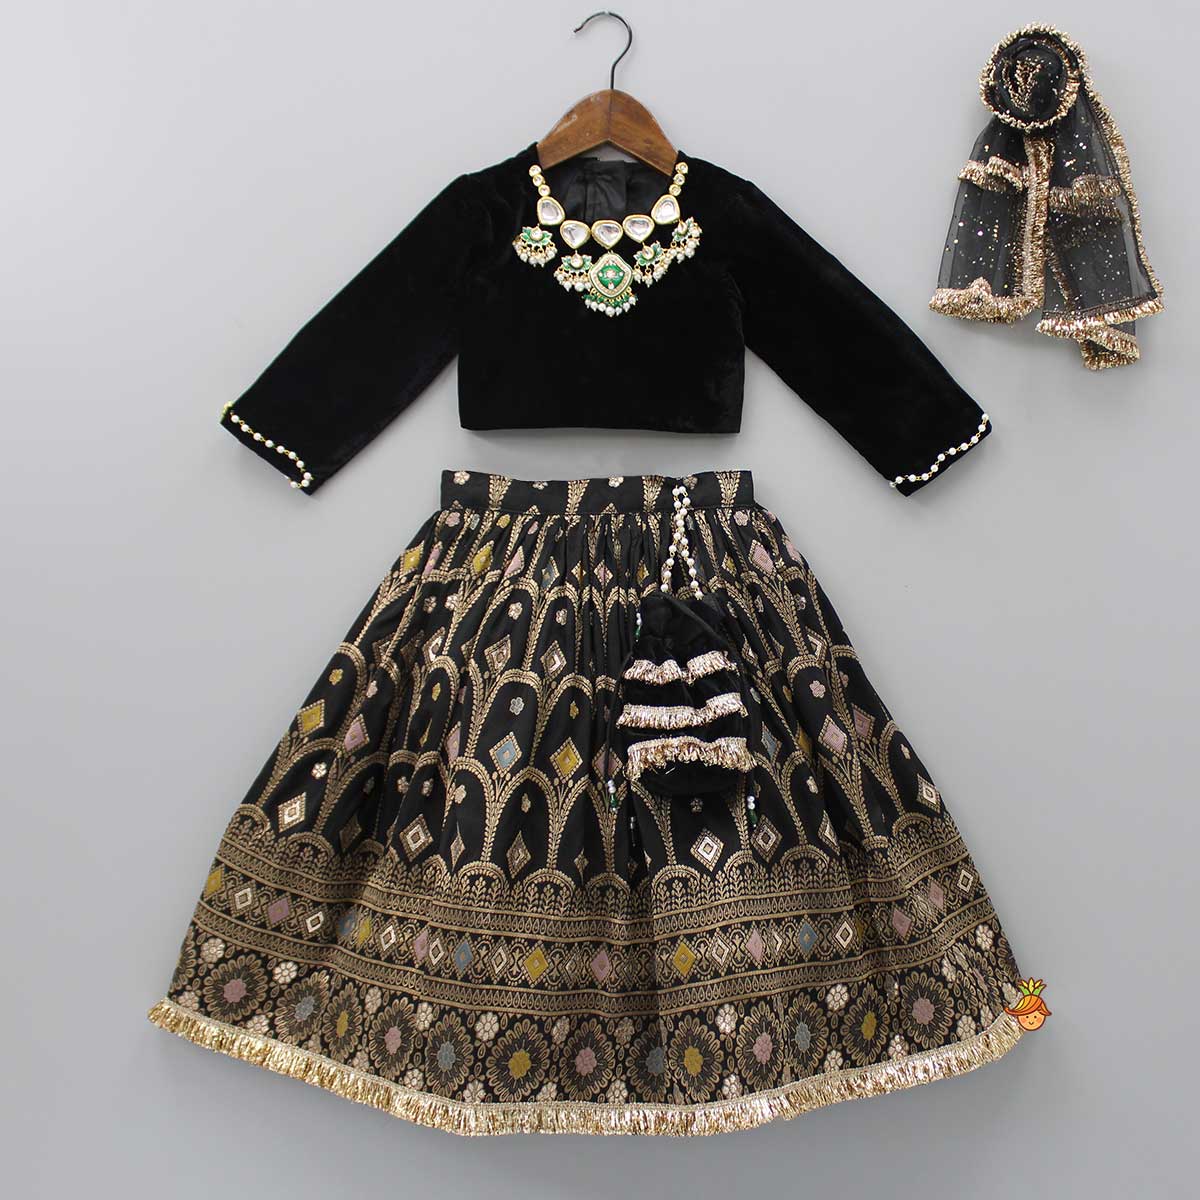 Stone Studded Black Velvet Top And Brocade Embroidered Lehenga With Shimmery Fringes Dupatta And Potli Bag